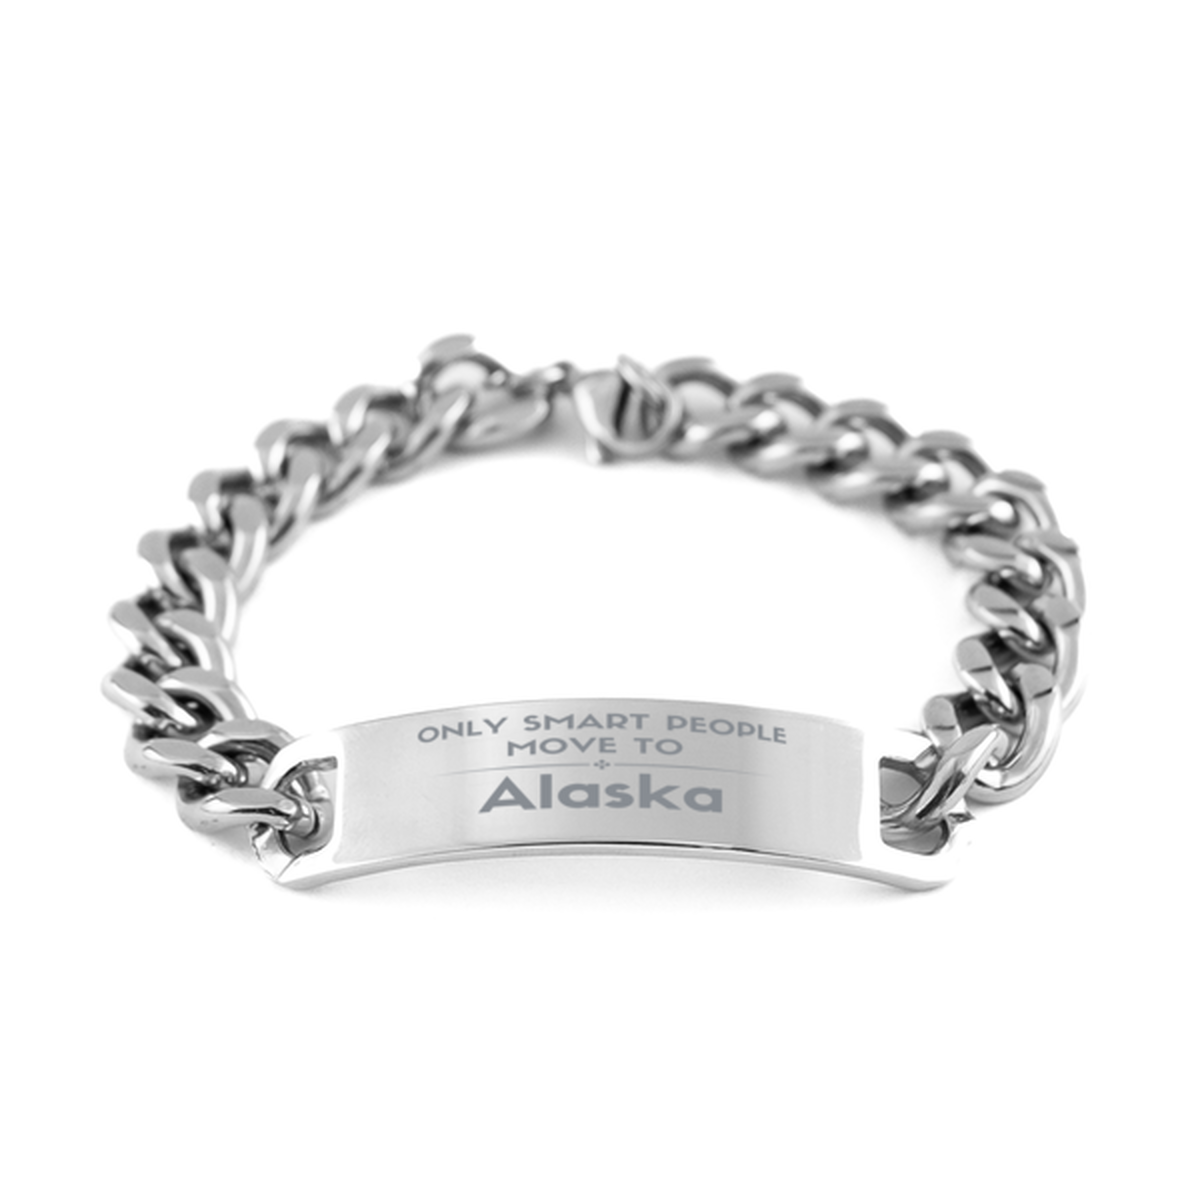 Only smart people move to Alaska Cuban Chain Stainless Steel Bracelet, Gag Gifts For Alaska, Move to Alaska Gifts for Friends Coworker Funny Saying Quote